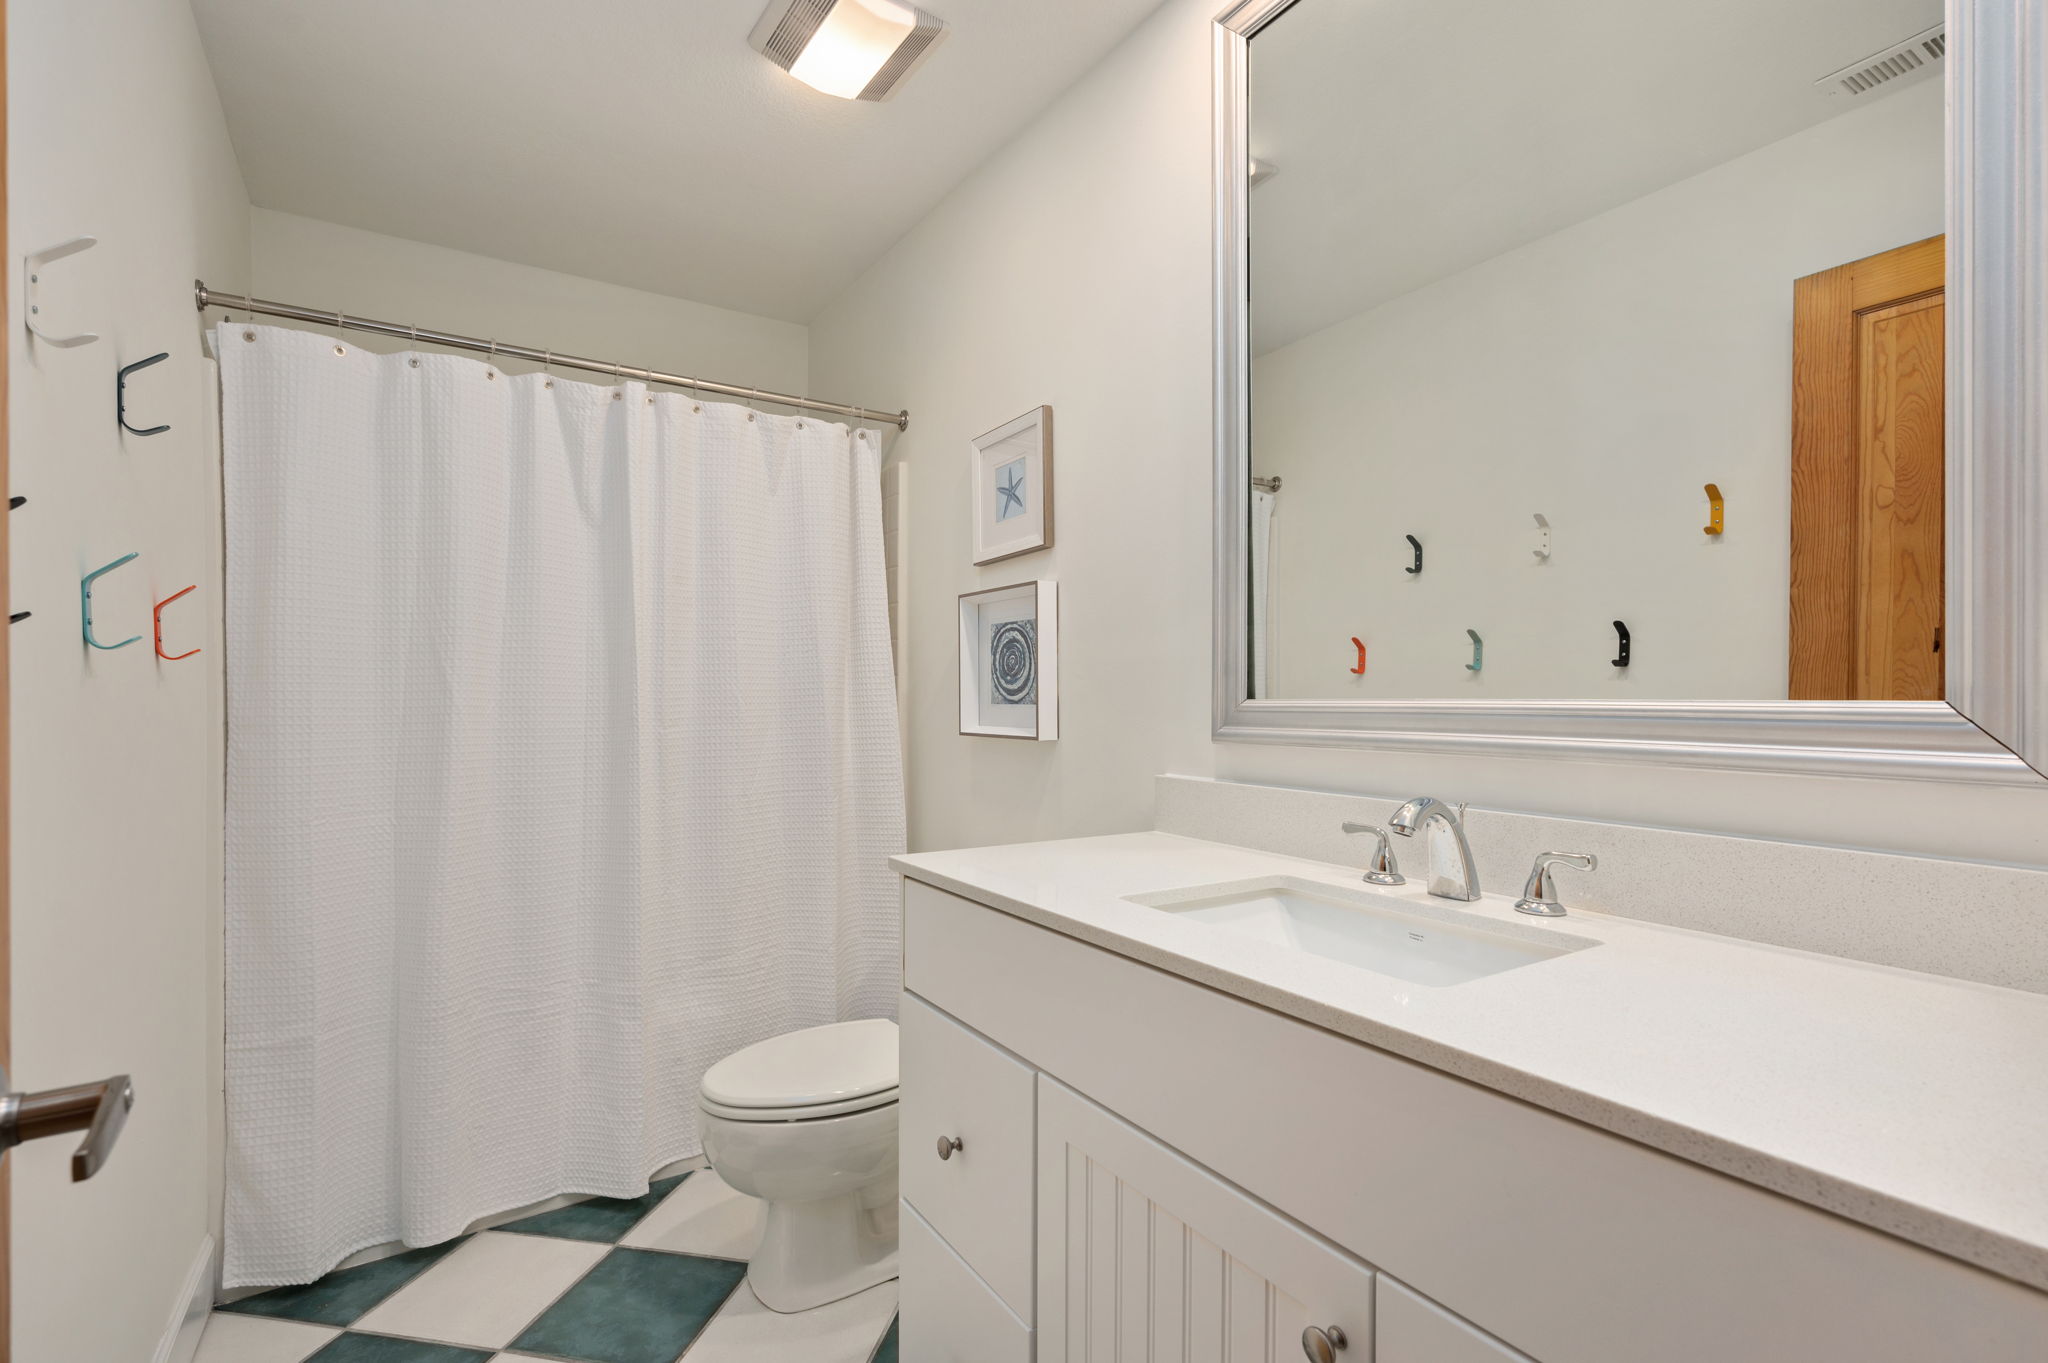 57216 Summerplace Dr | Mid Level Bedroom 4 - Private Bath